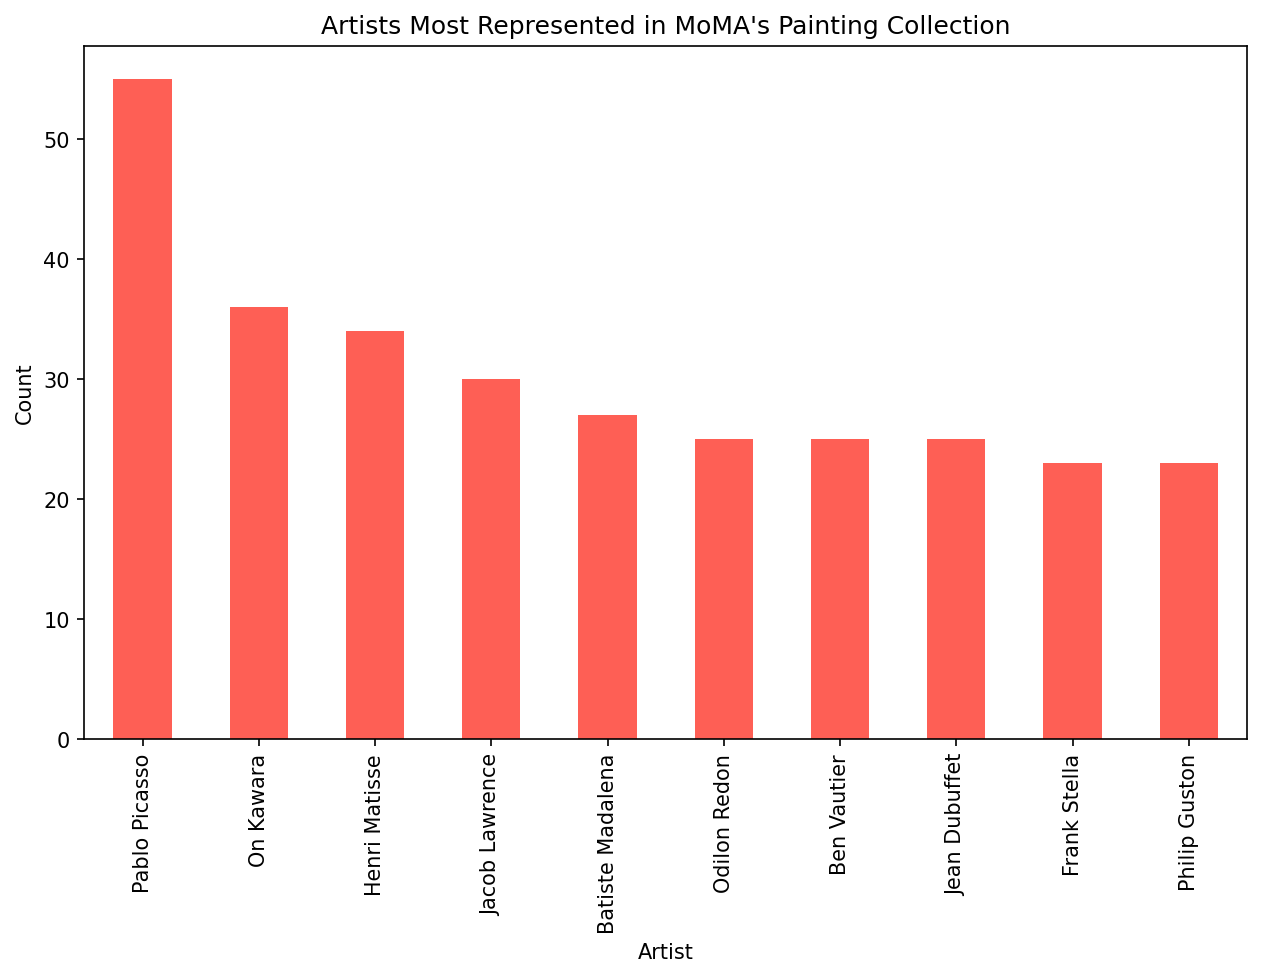 Painters most represented in MoMA's collection